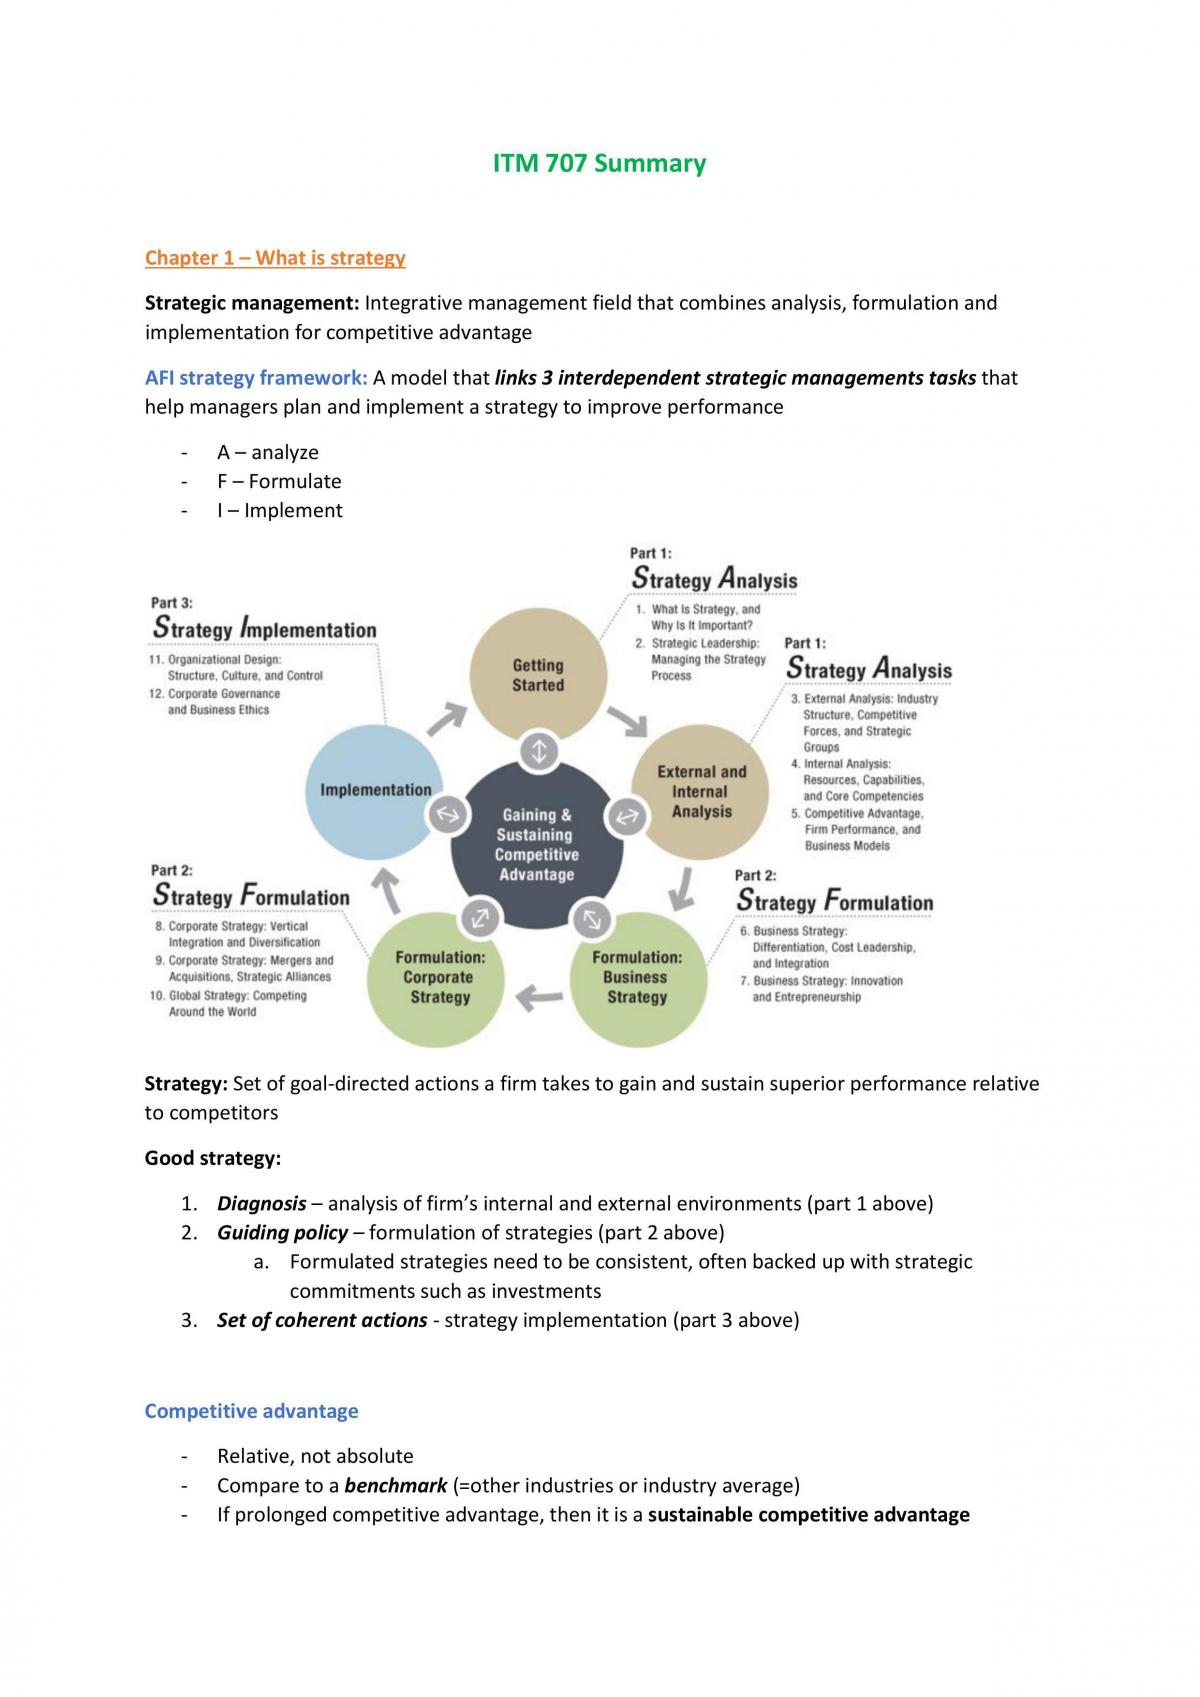 Strategy, Management and Acquisition Summary - Page 1